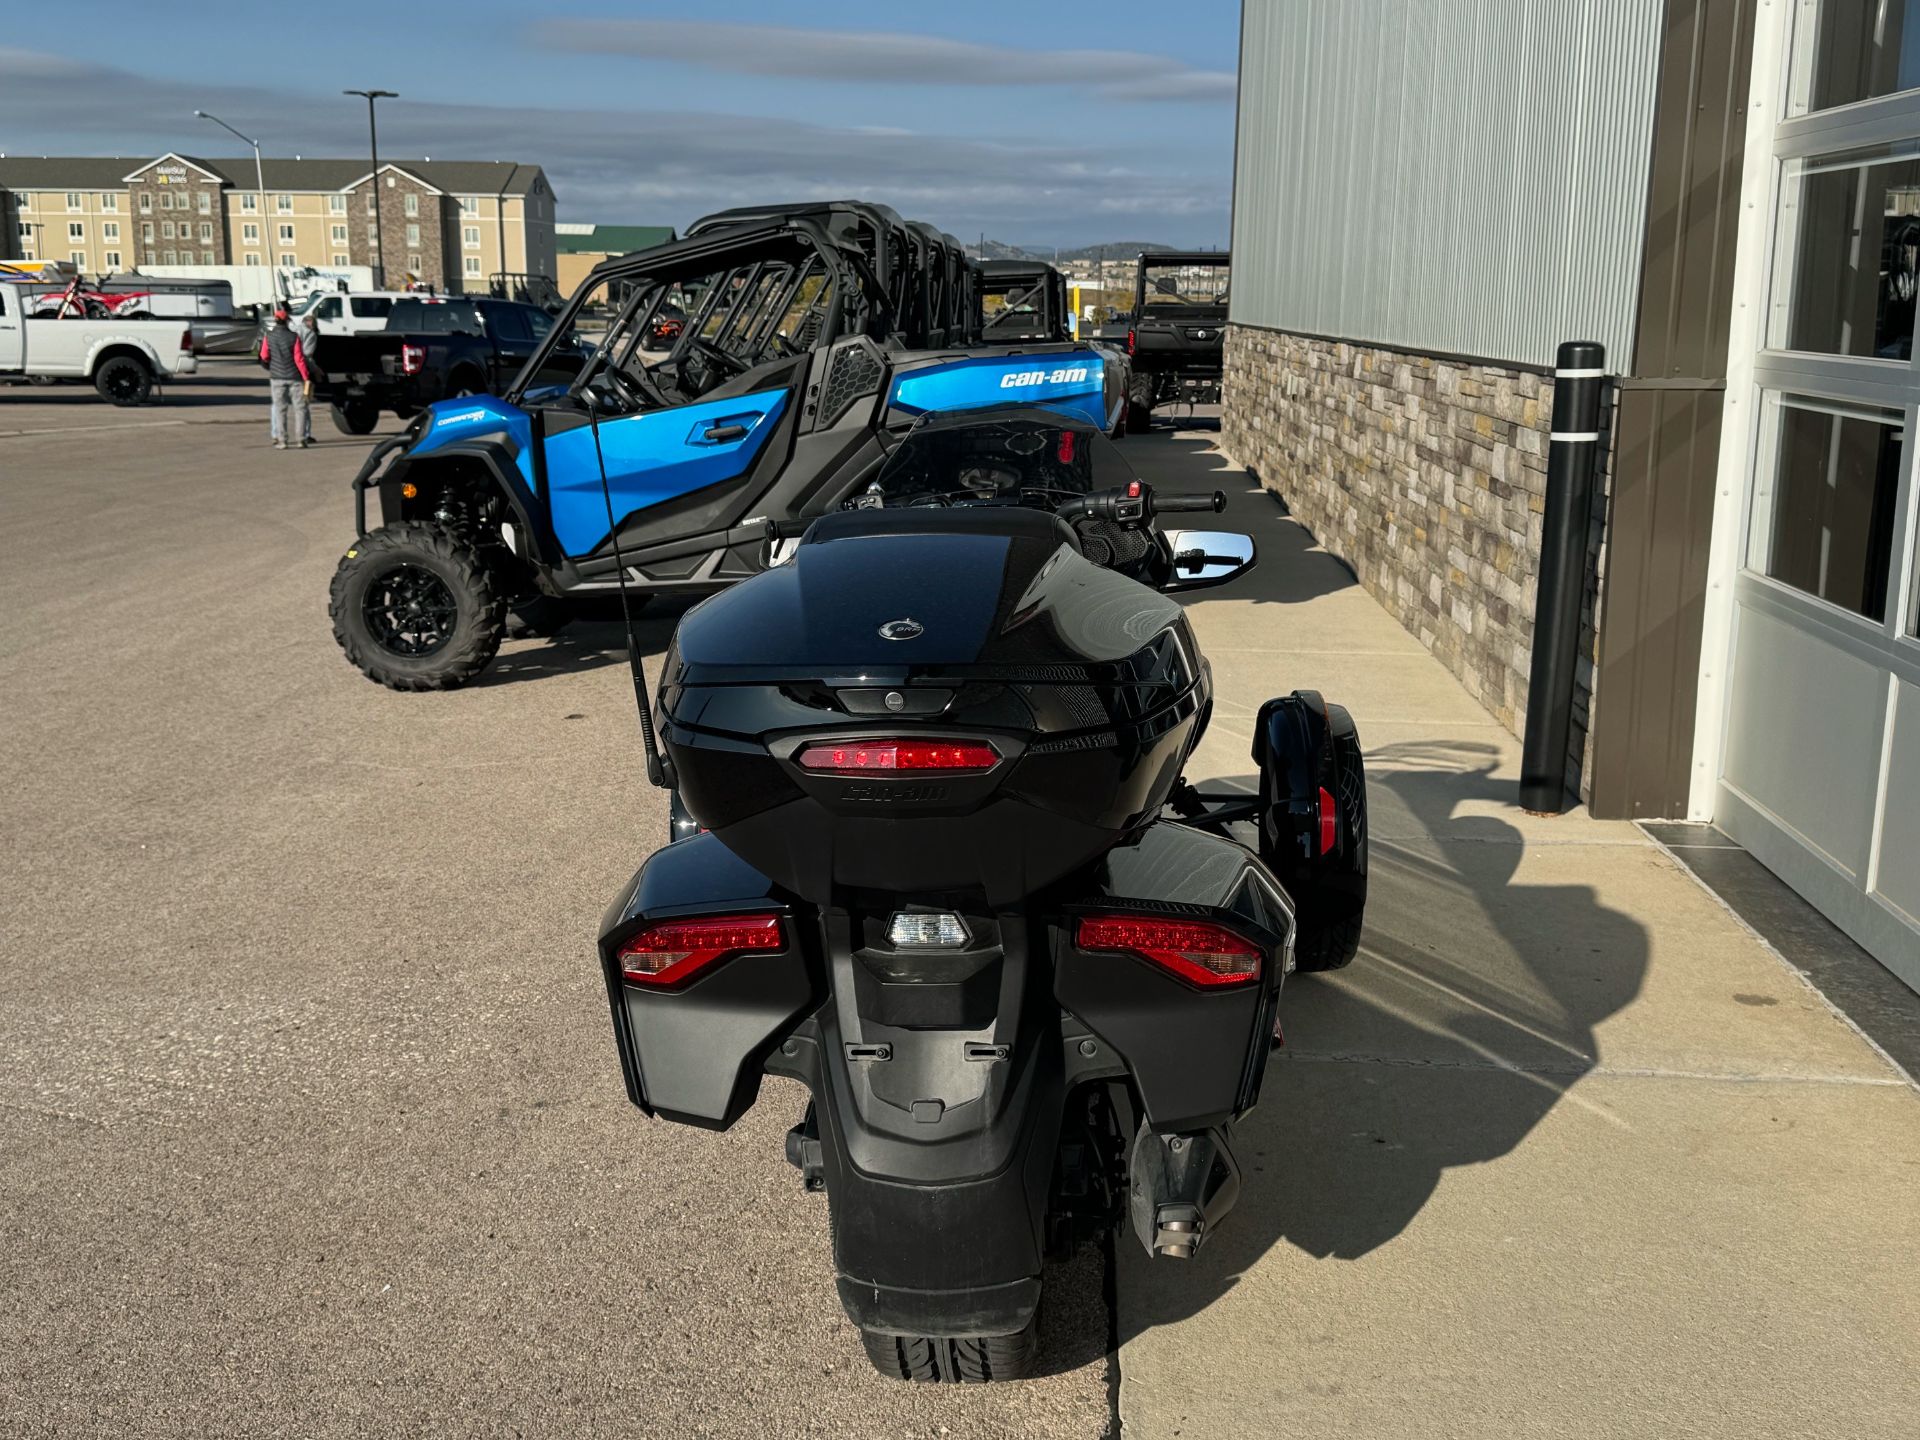 2020 Can-Am Spyder F3 Limited in Rapid City, South Dakota - Photo 4